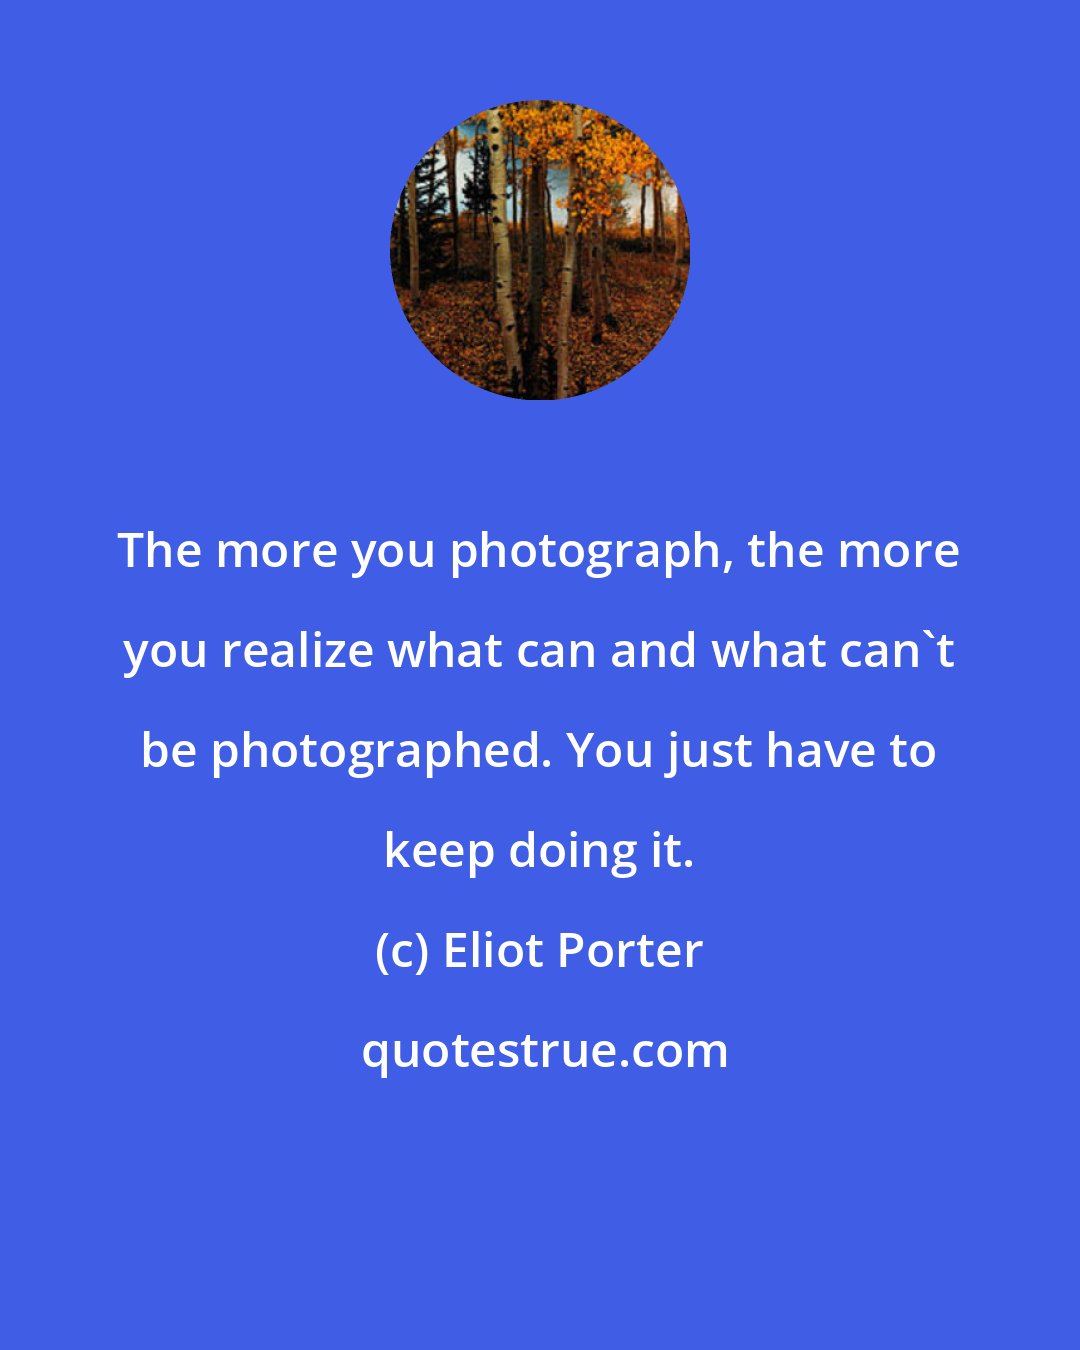 Eliot Porter: The more you photograph, the more you realize what can and what can't be photographed. You just have to keep doing it.